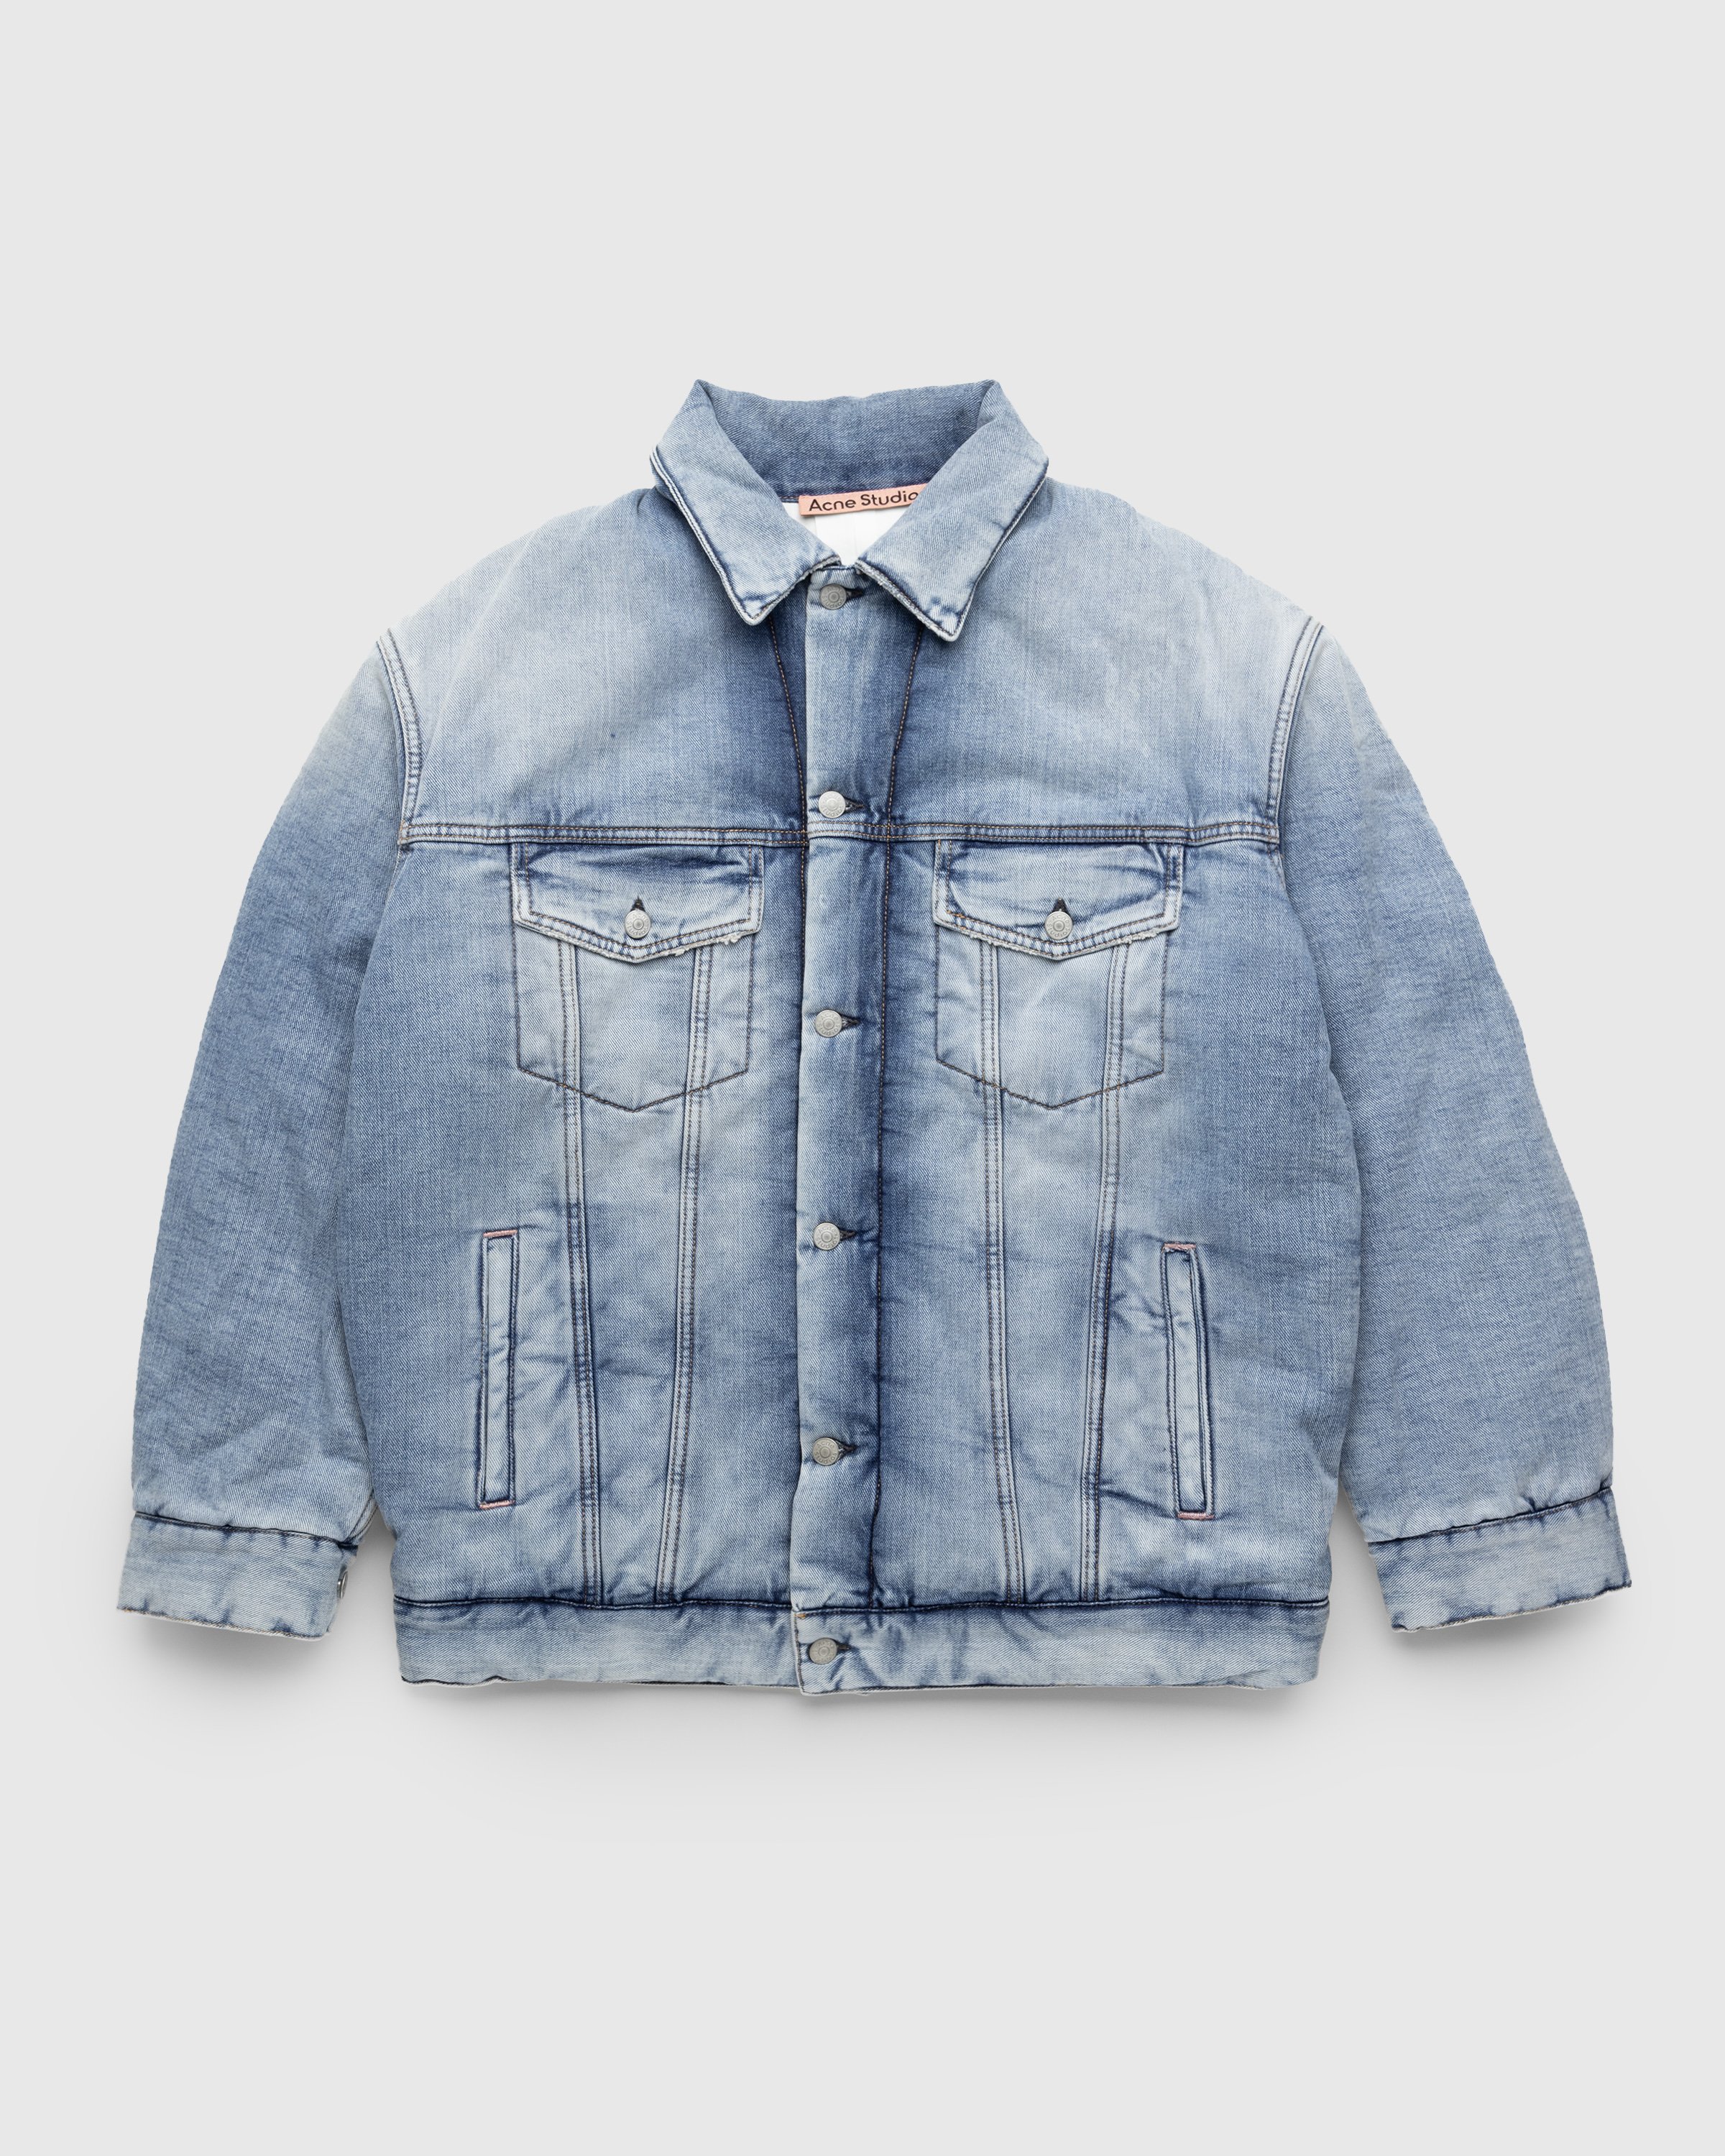 Acne Studios - FN-UX-OUTW000025 - Clothing - Blue - Image 1